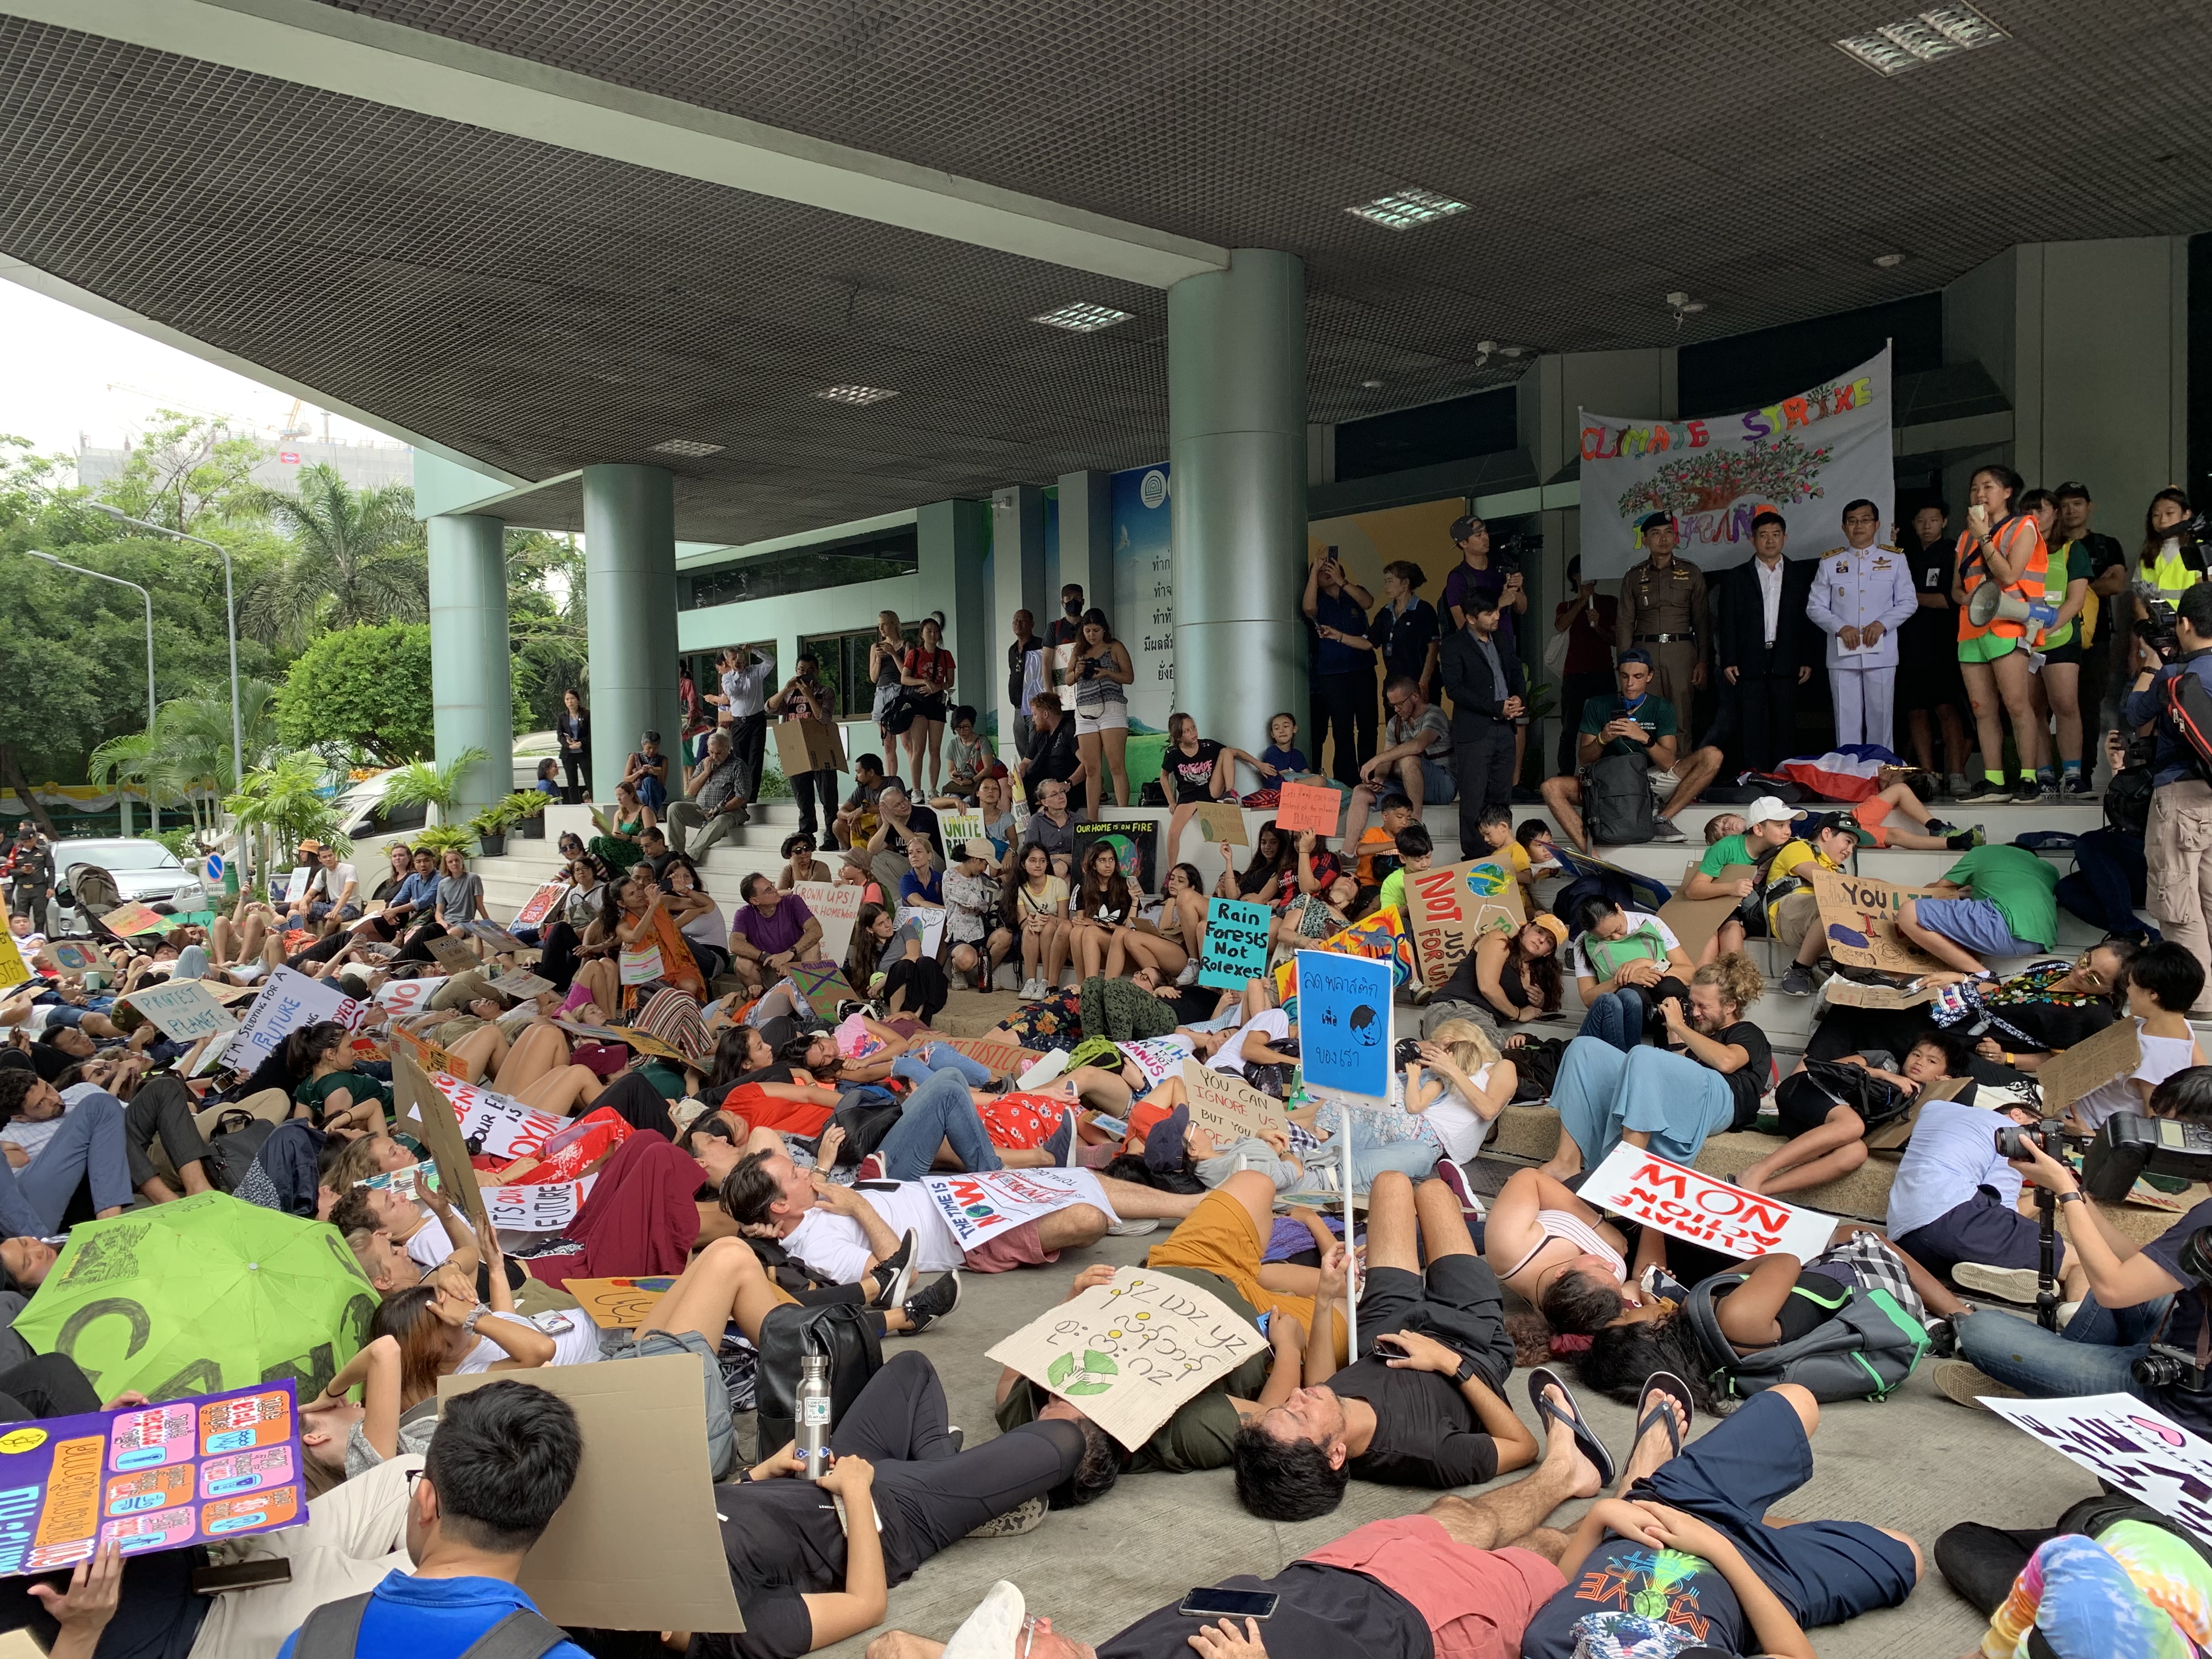 Protesters laying on the ground as a symbol for impacts of climate change.